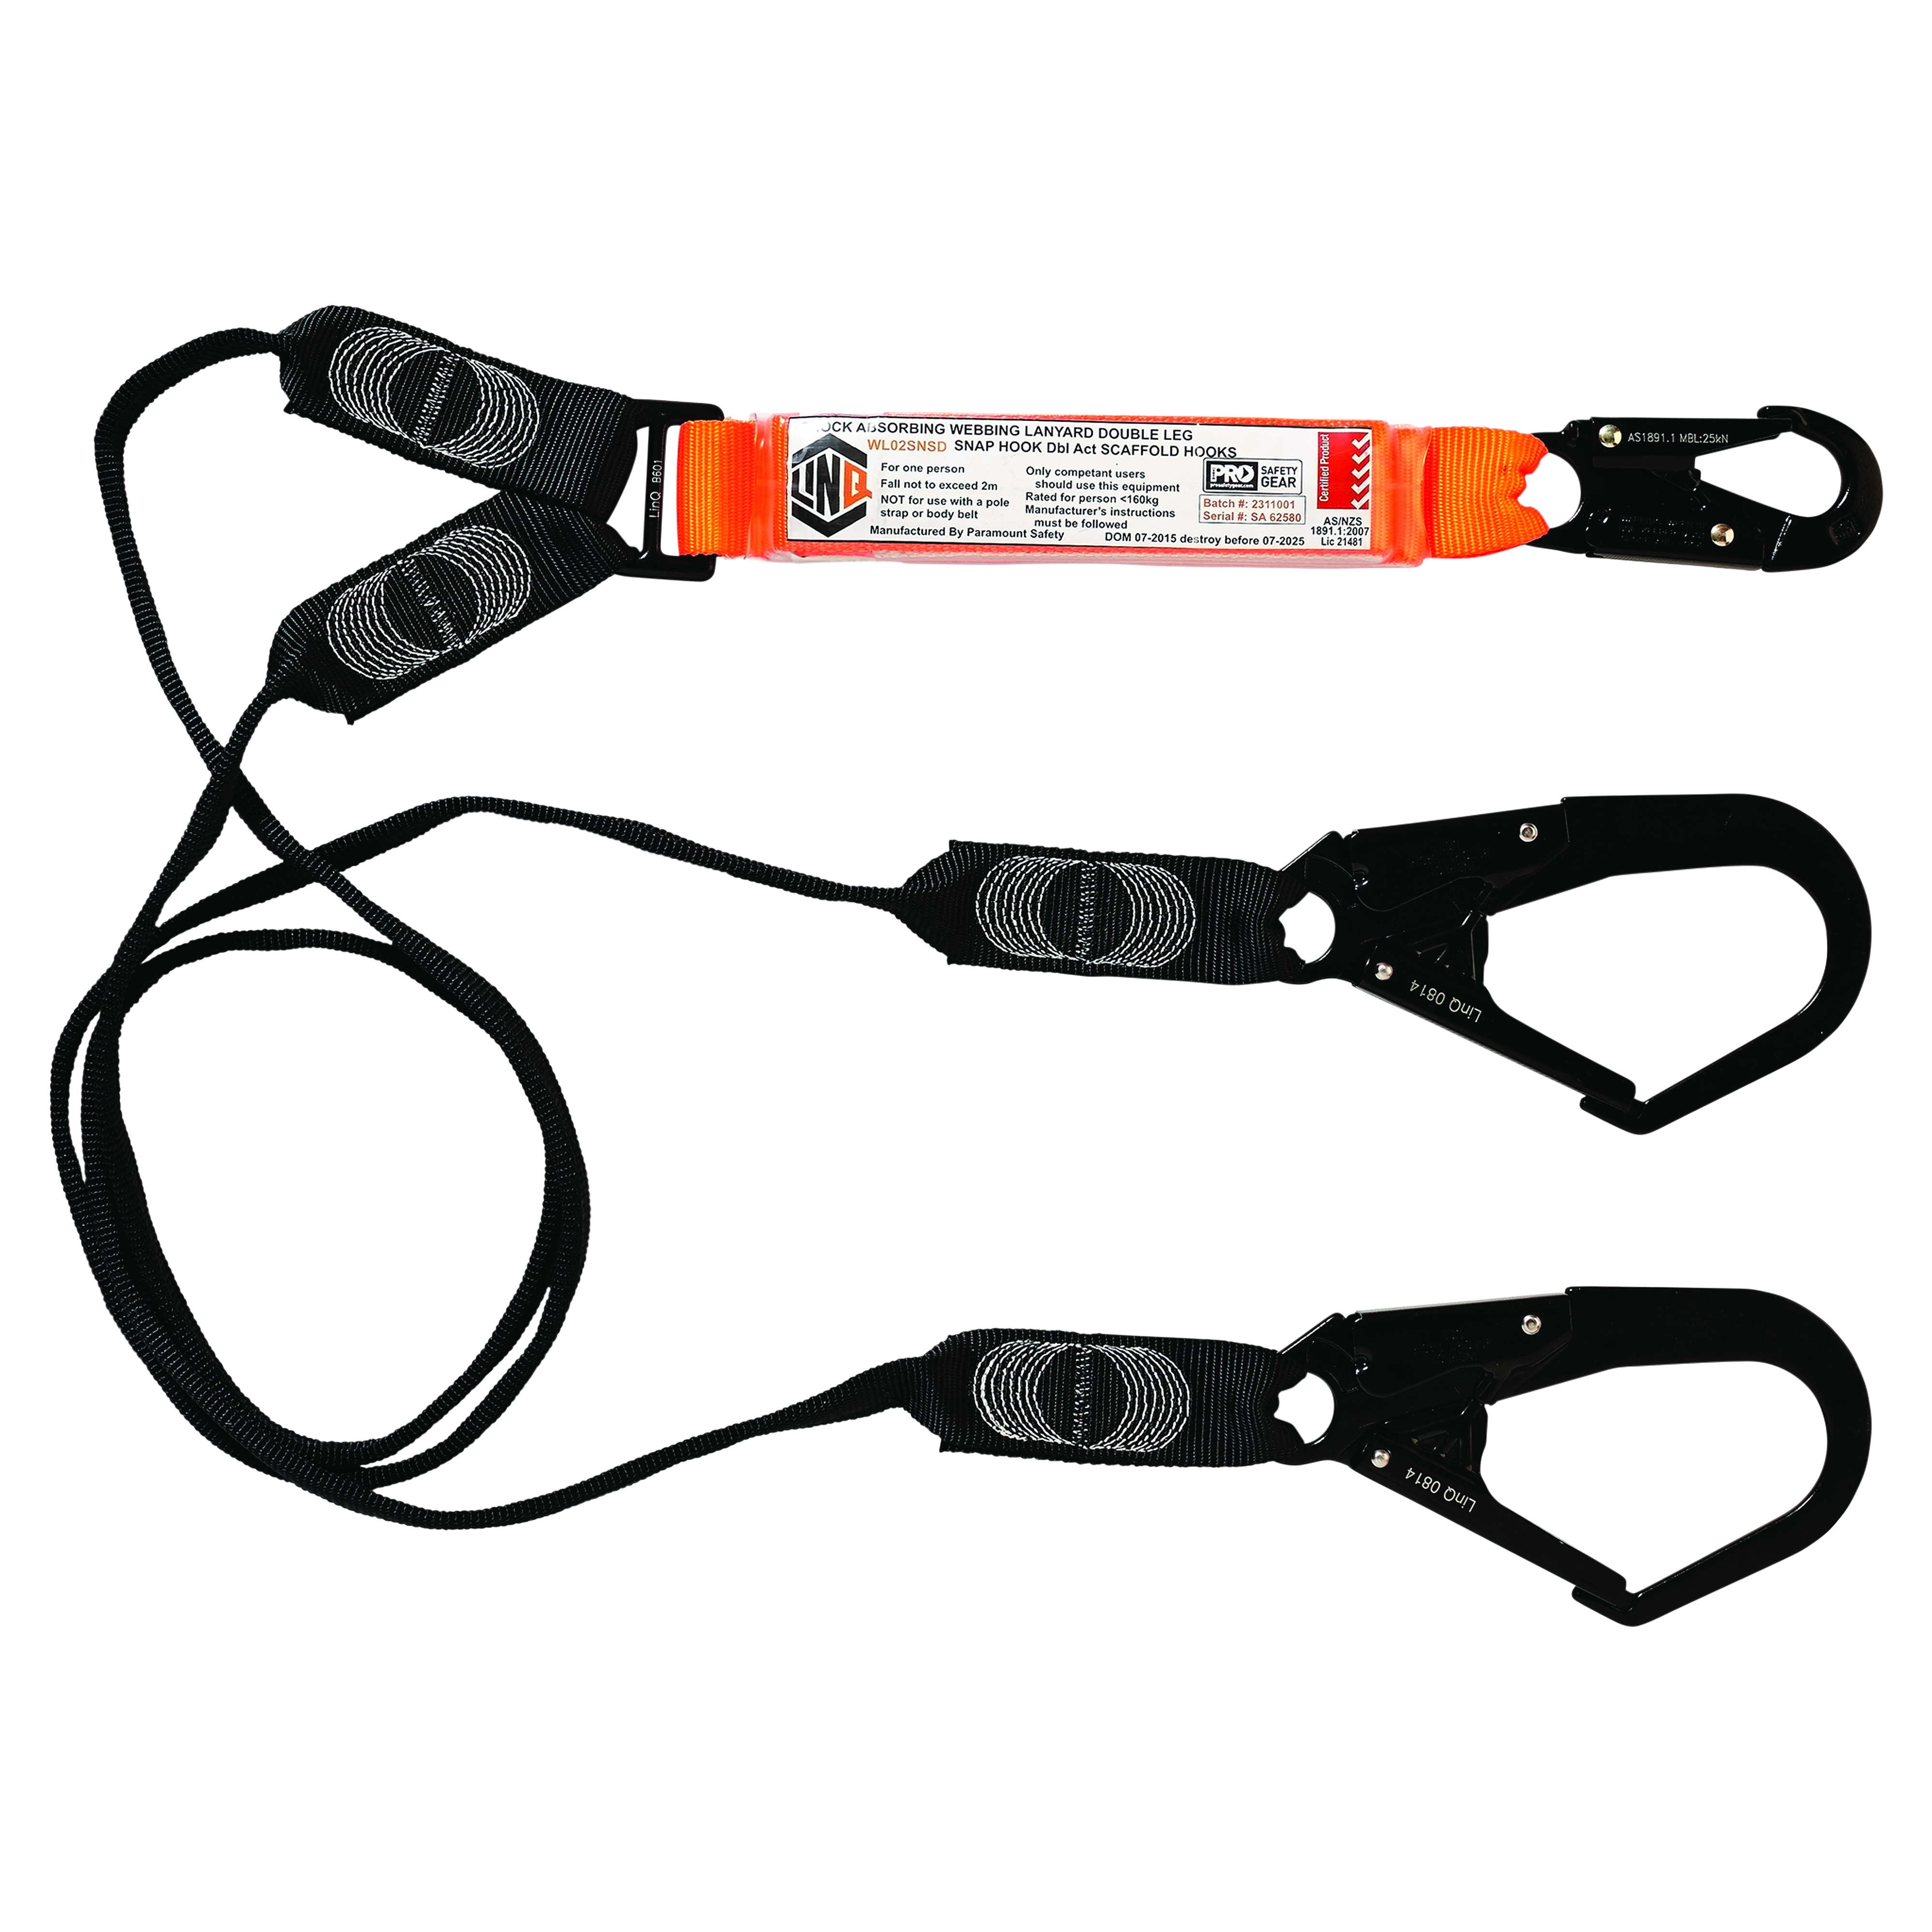 LINQ Double Webbing Lanyard with 1 x Snap Hook and 2 x Double Action Scaff Hooks